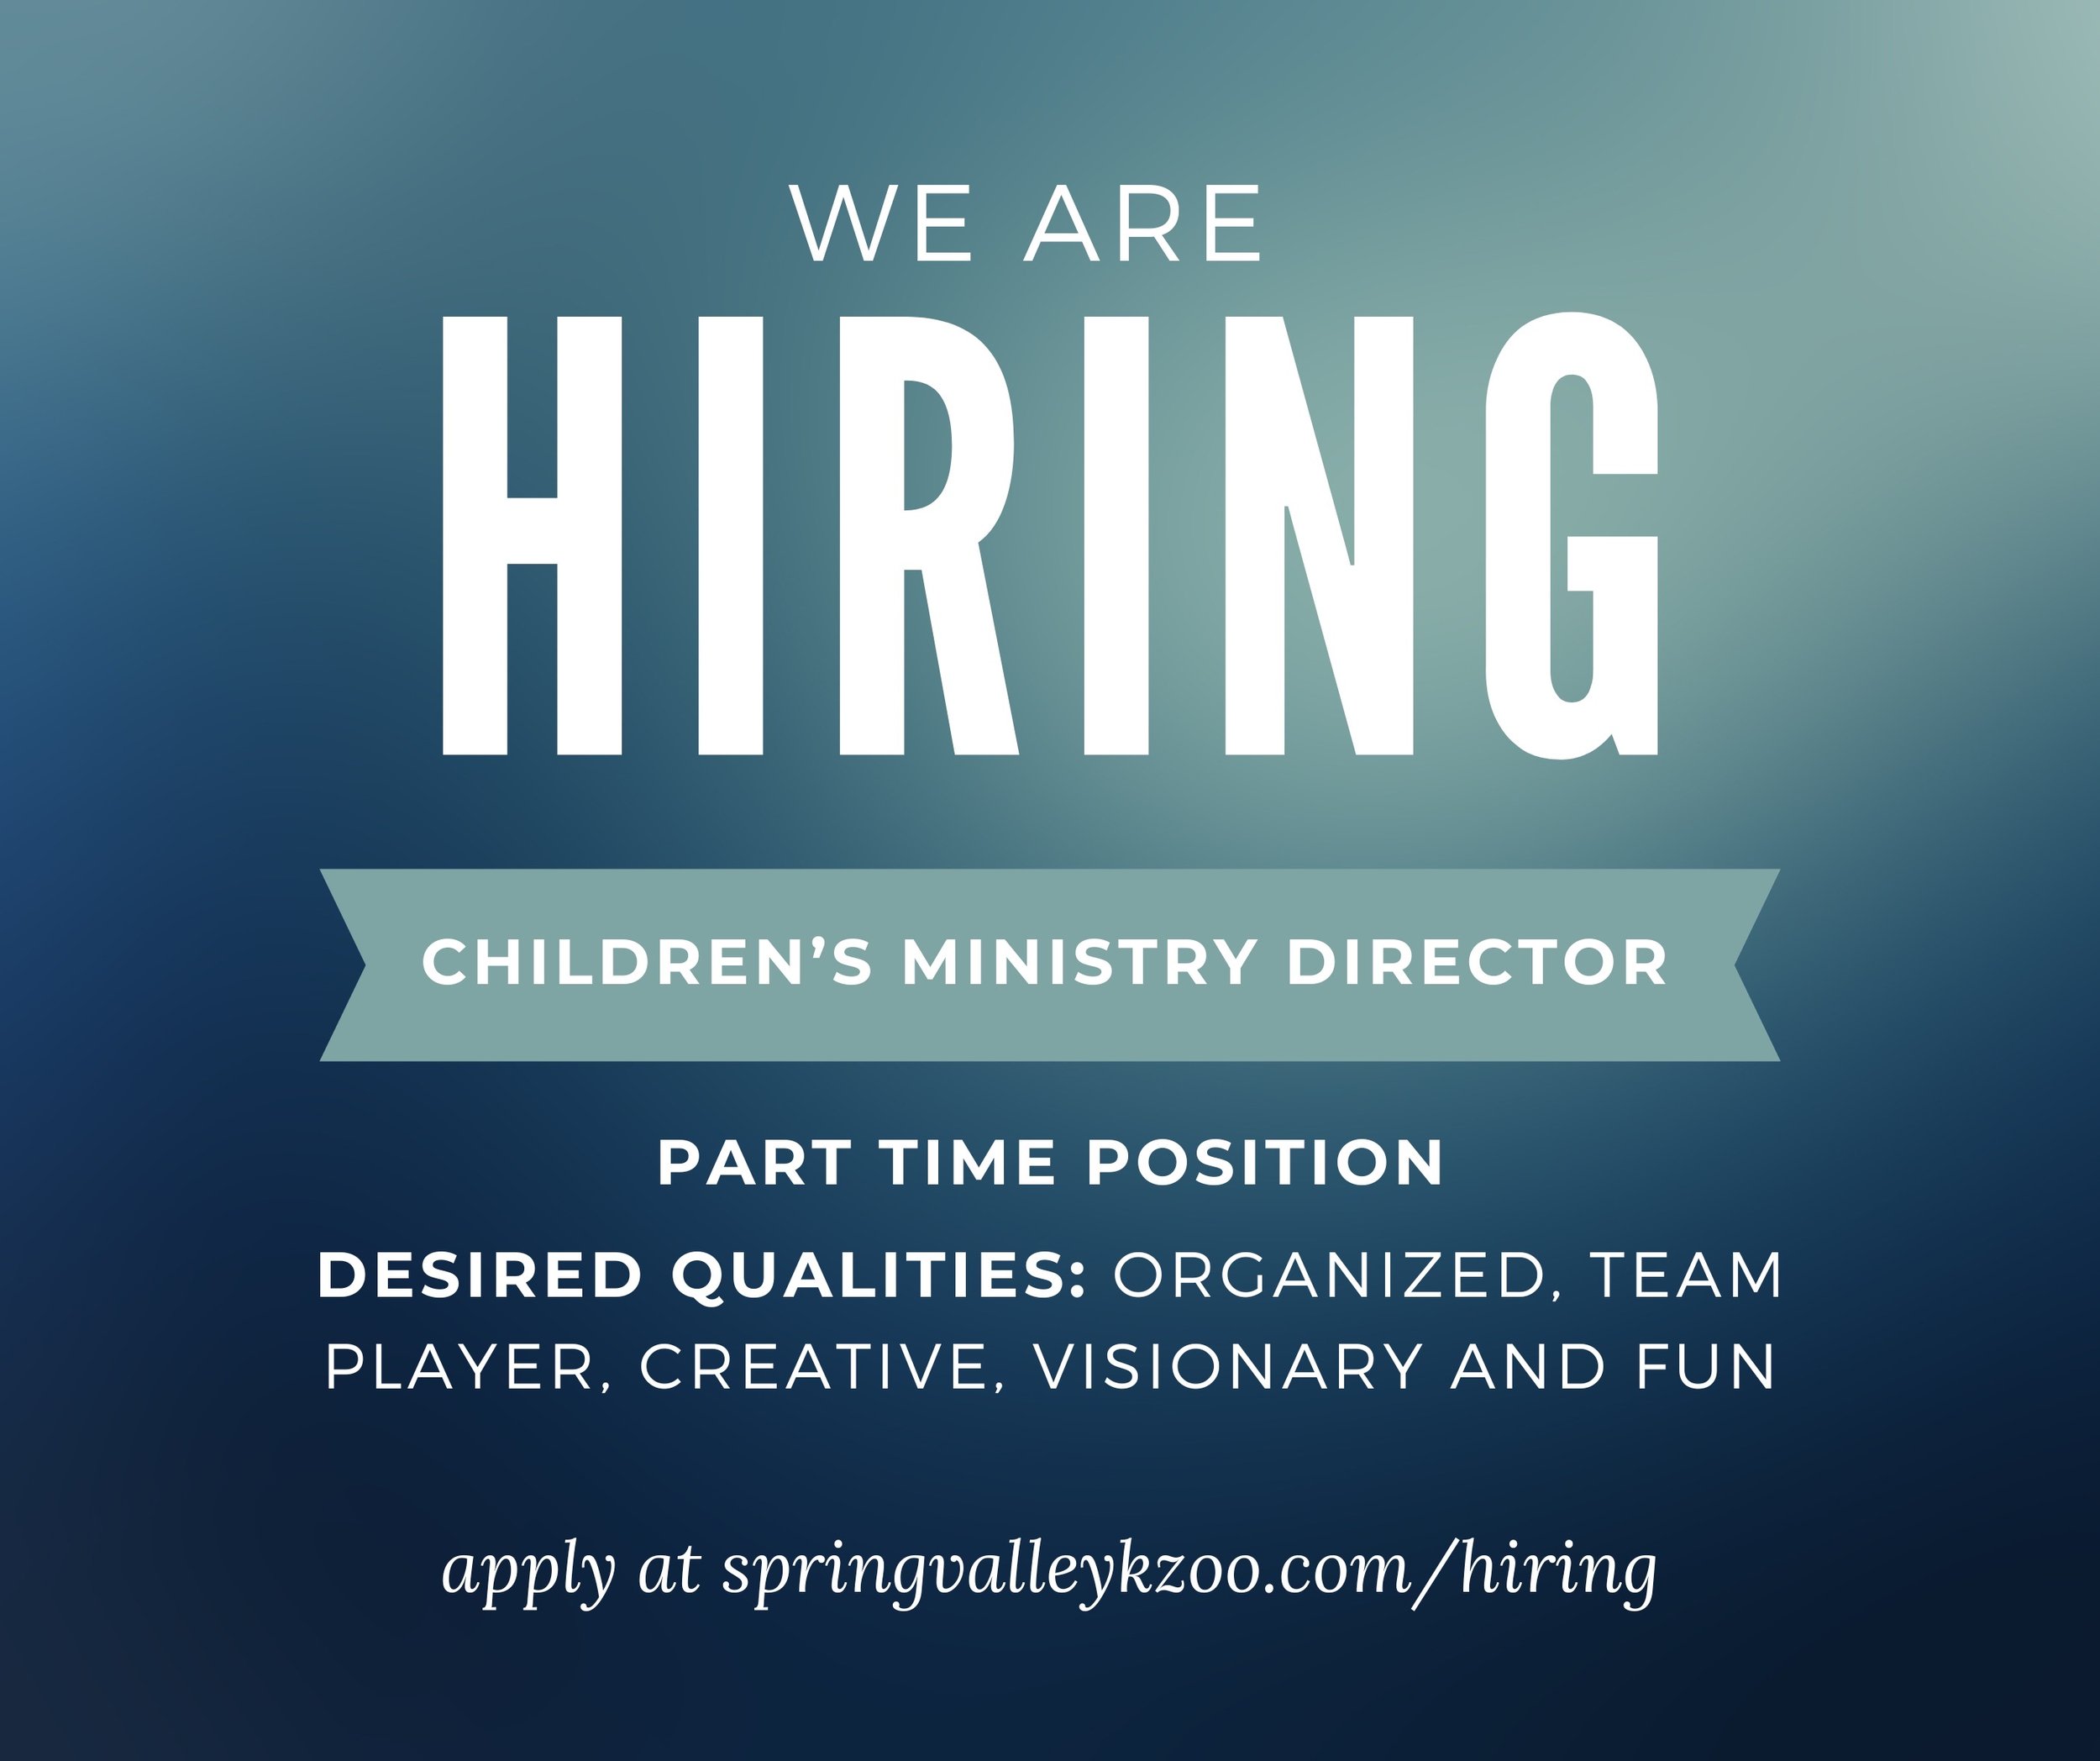 Apply to be part of our team